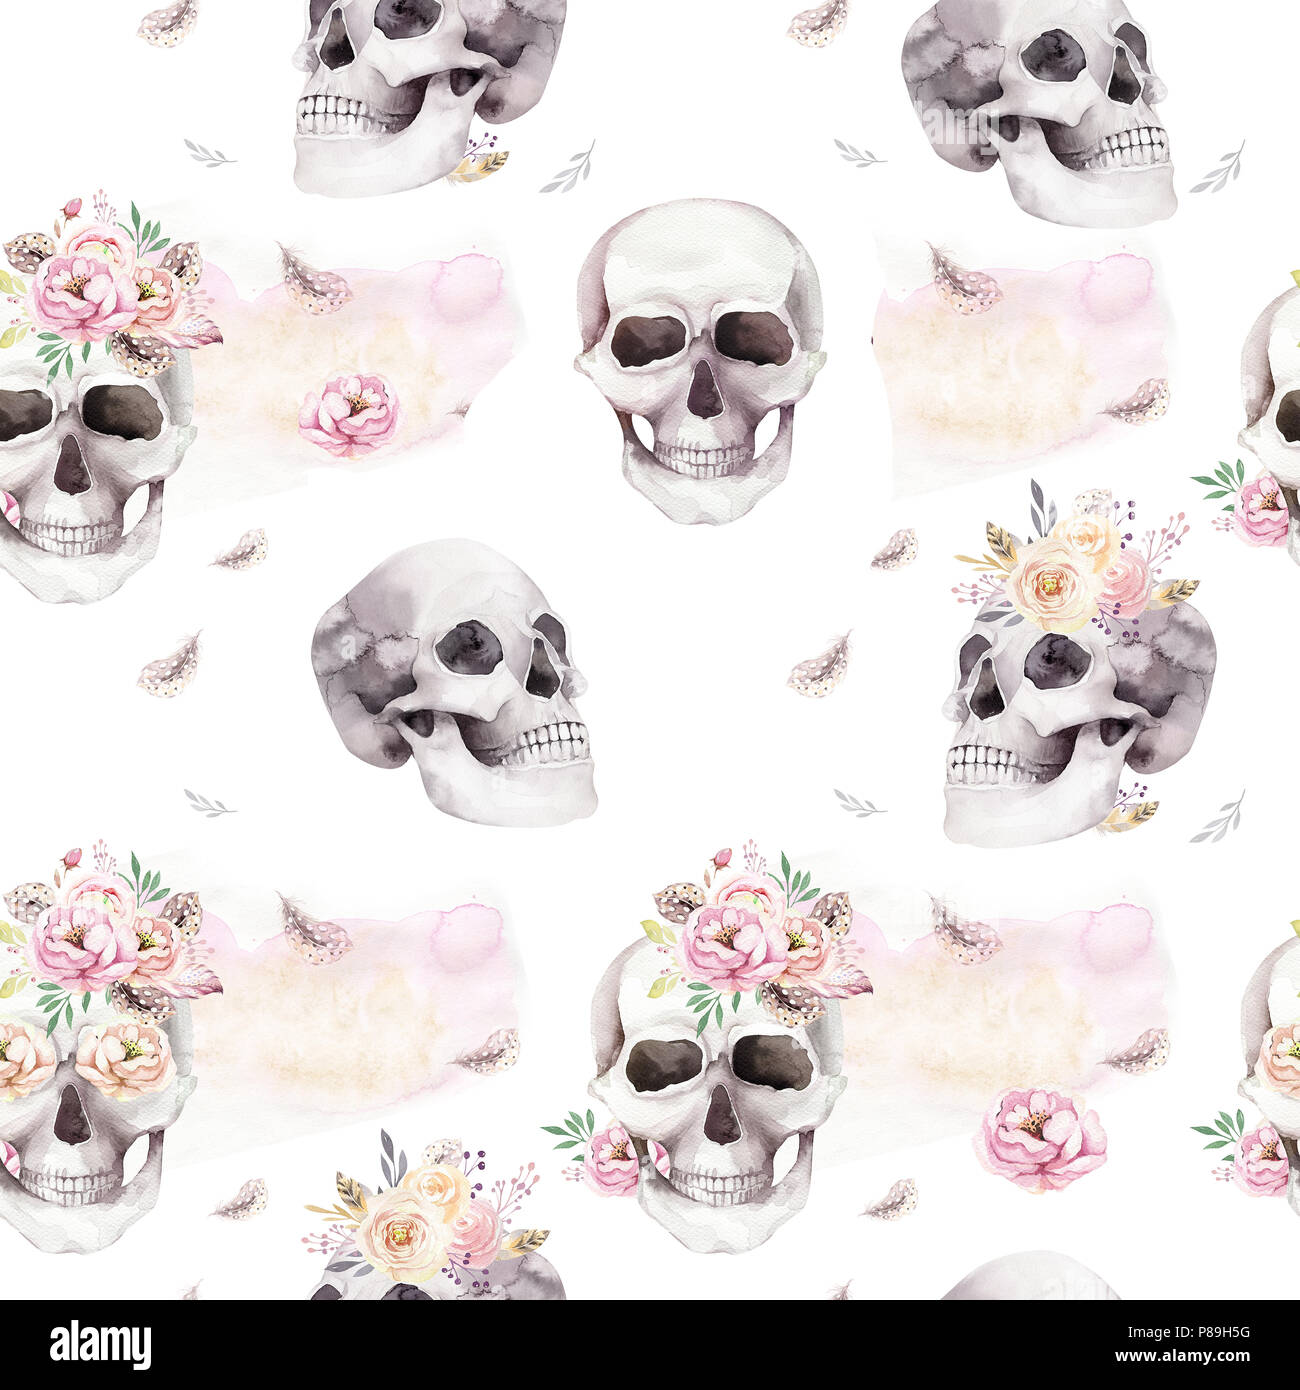 https://c8.alamy.com/comp/P89H5G/vintage-watercolor-patterns-with-skull-and-roses-wildflowers-and-flowers-hand-drawn-illustration-in-boho-style-floral-skull-wallpaper-day-of-the-d-P89H5G.jpg